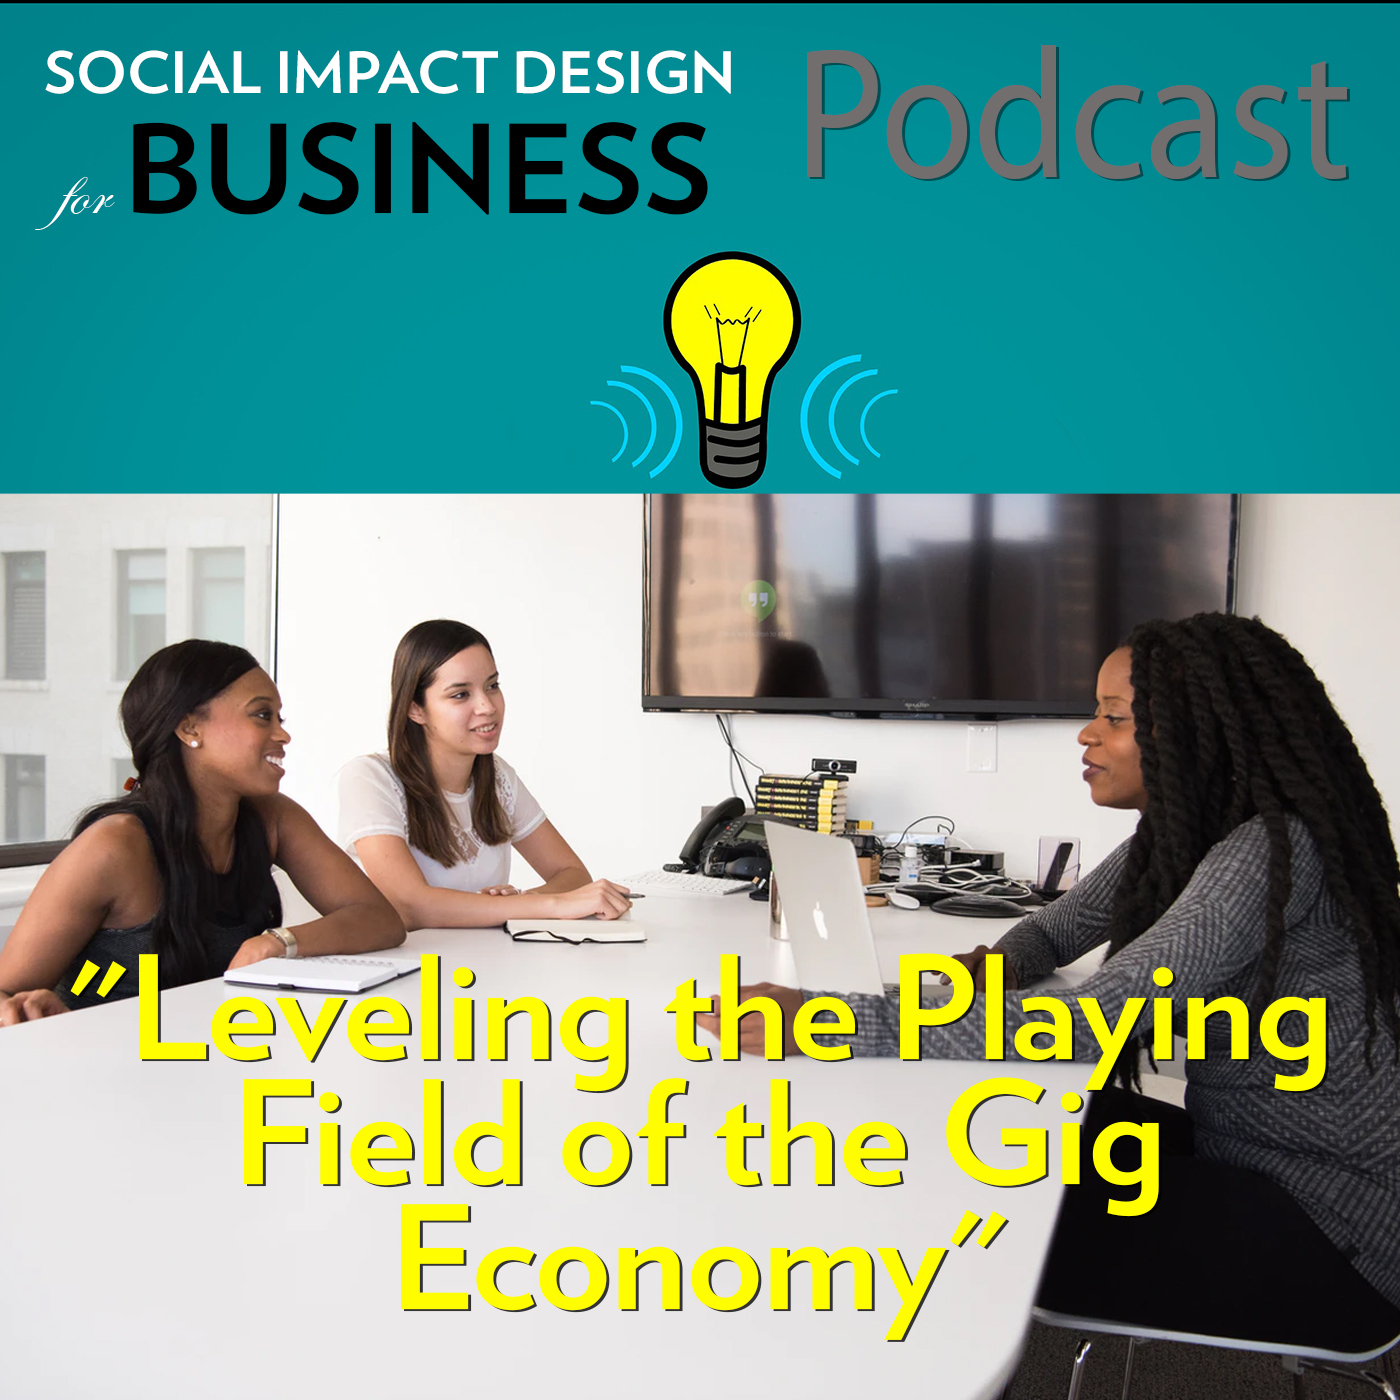 Podcast: Leveling the Playing Field of the Gig Economy